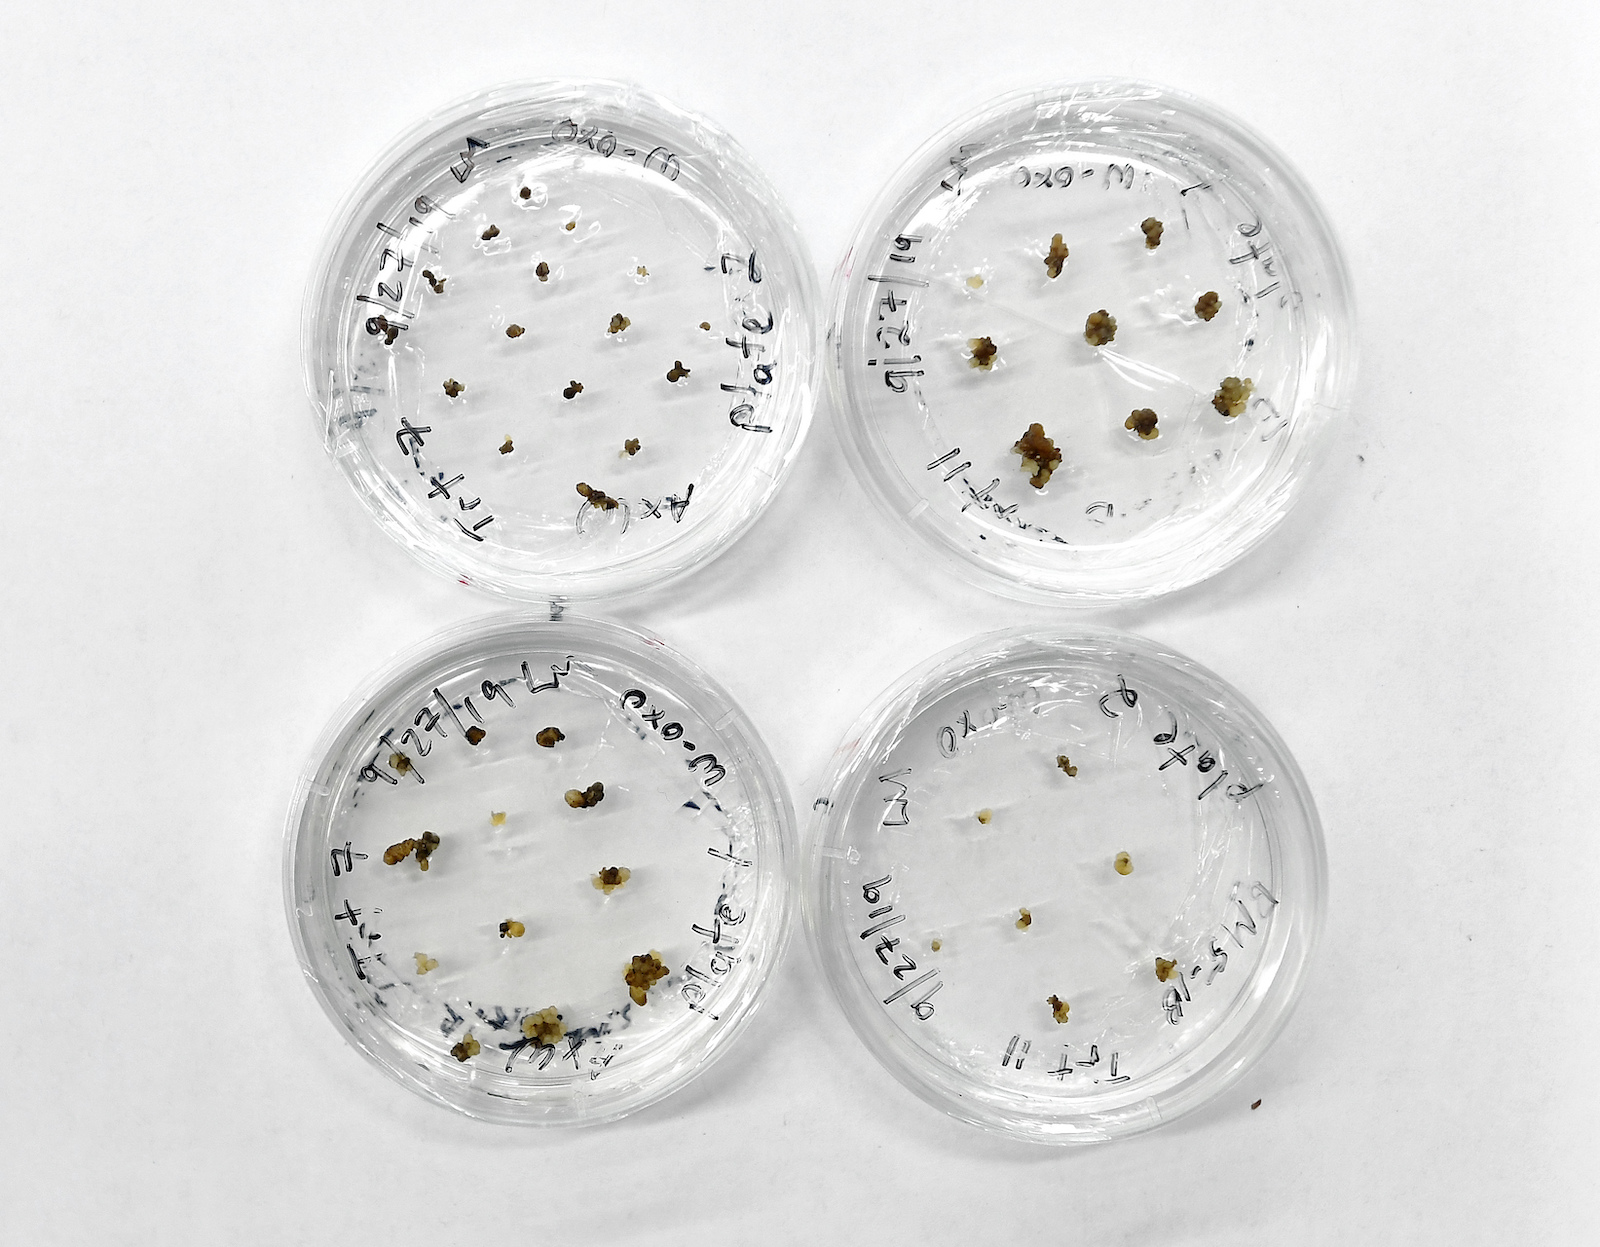 petri dishes with tiny dots that are actually tree embryos